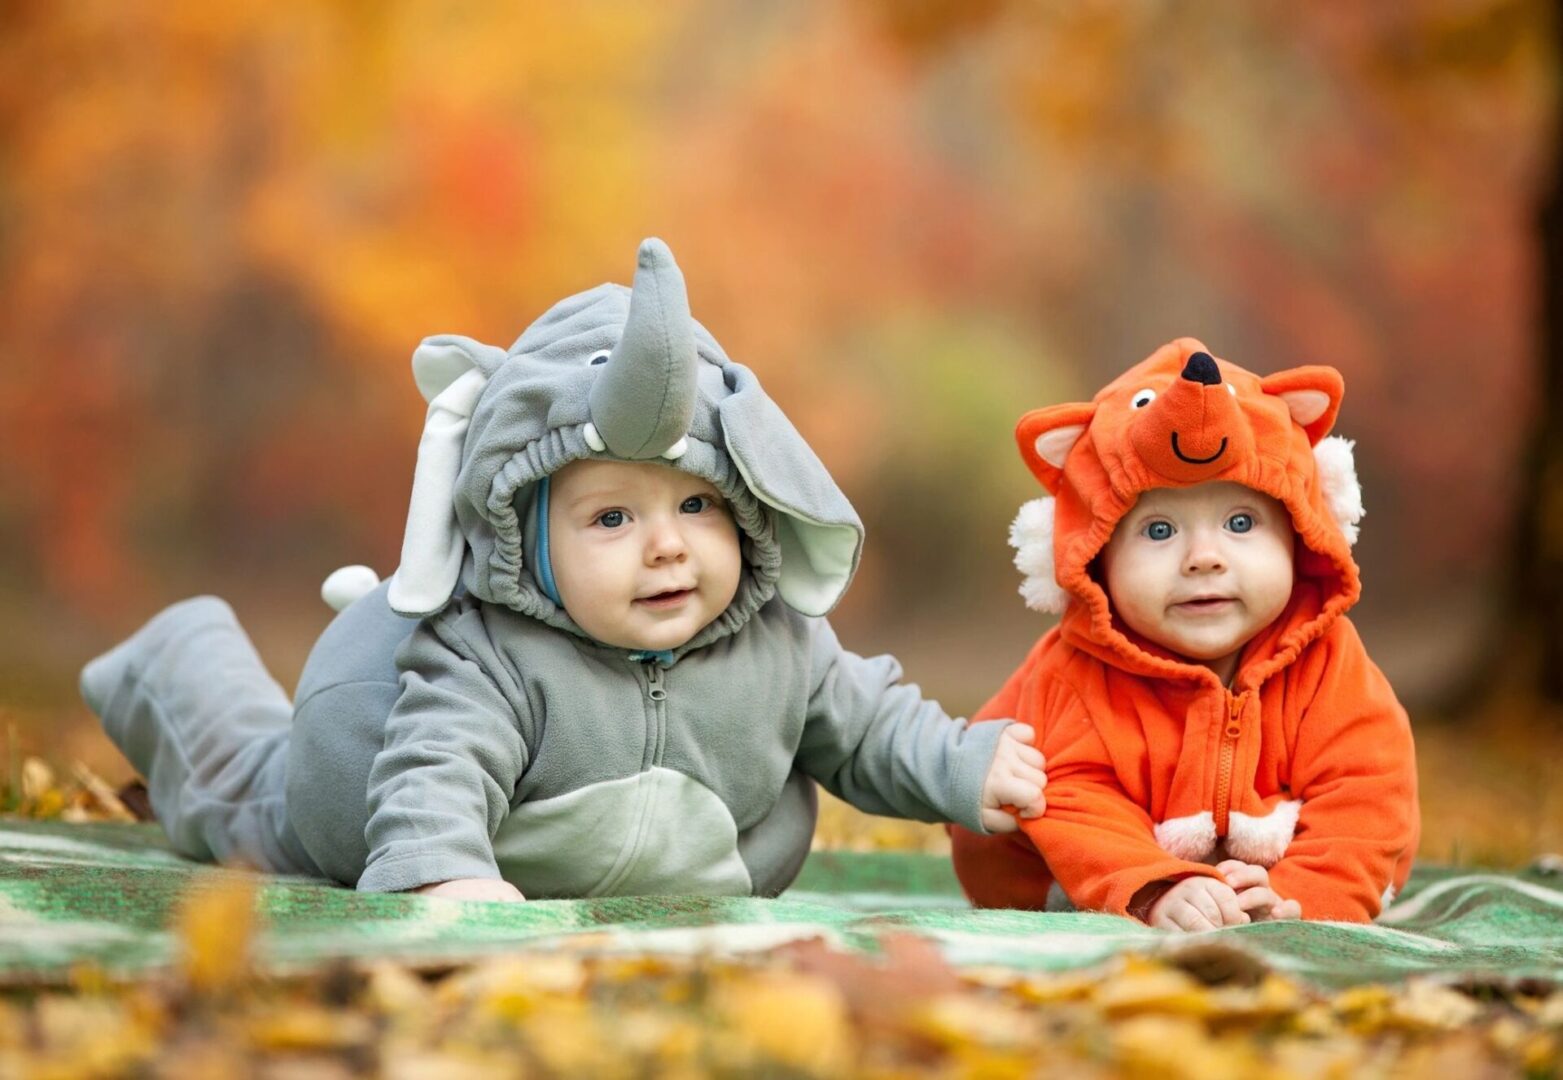 Two babies dressed in costumes sitting on the ground.